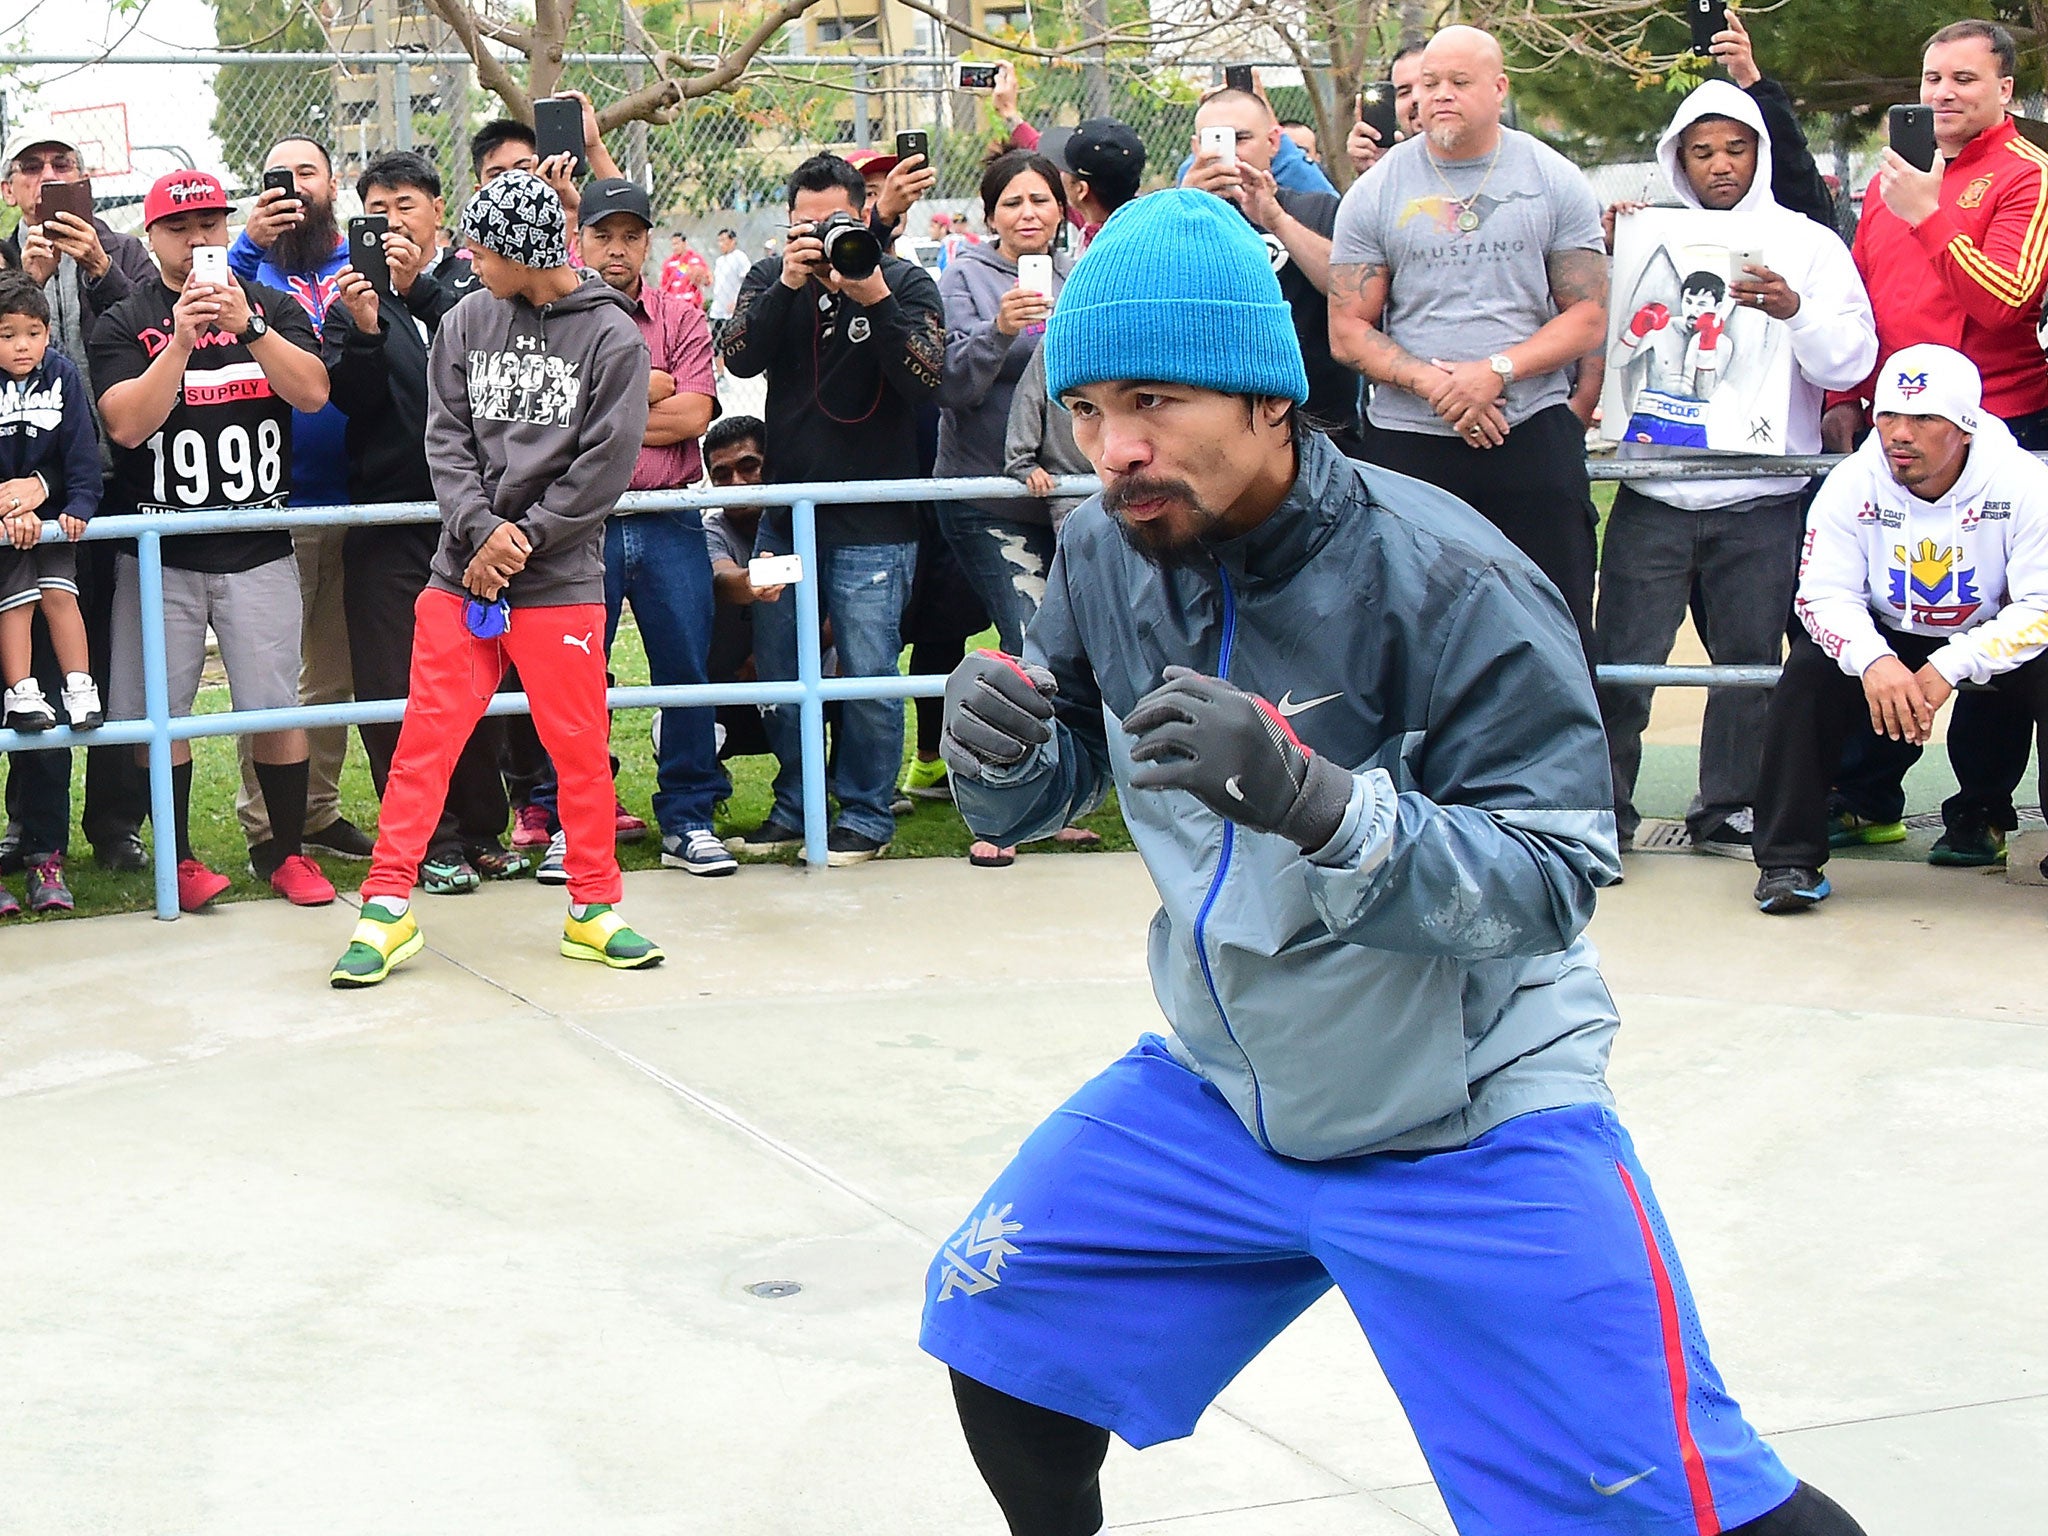 Manny Pacquiao during training for the Mayweather fight